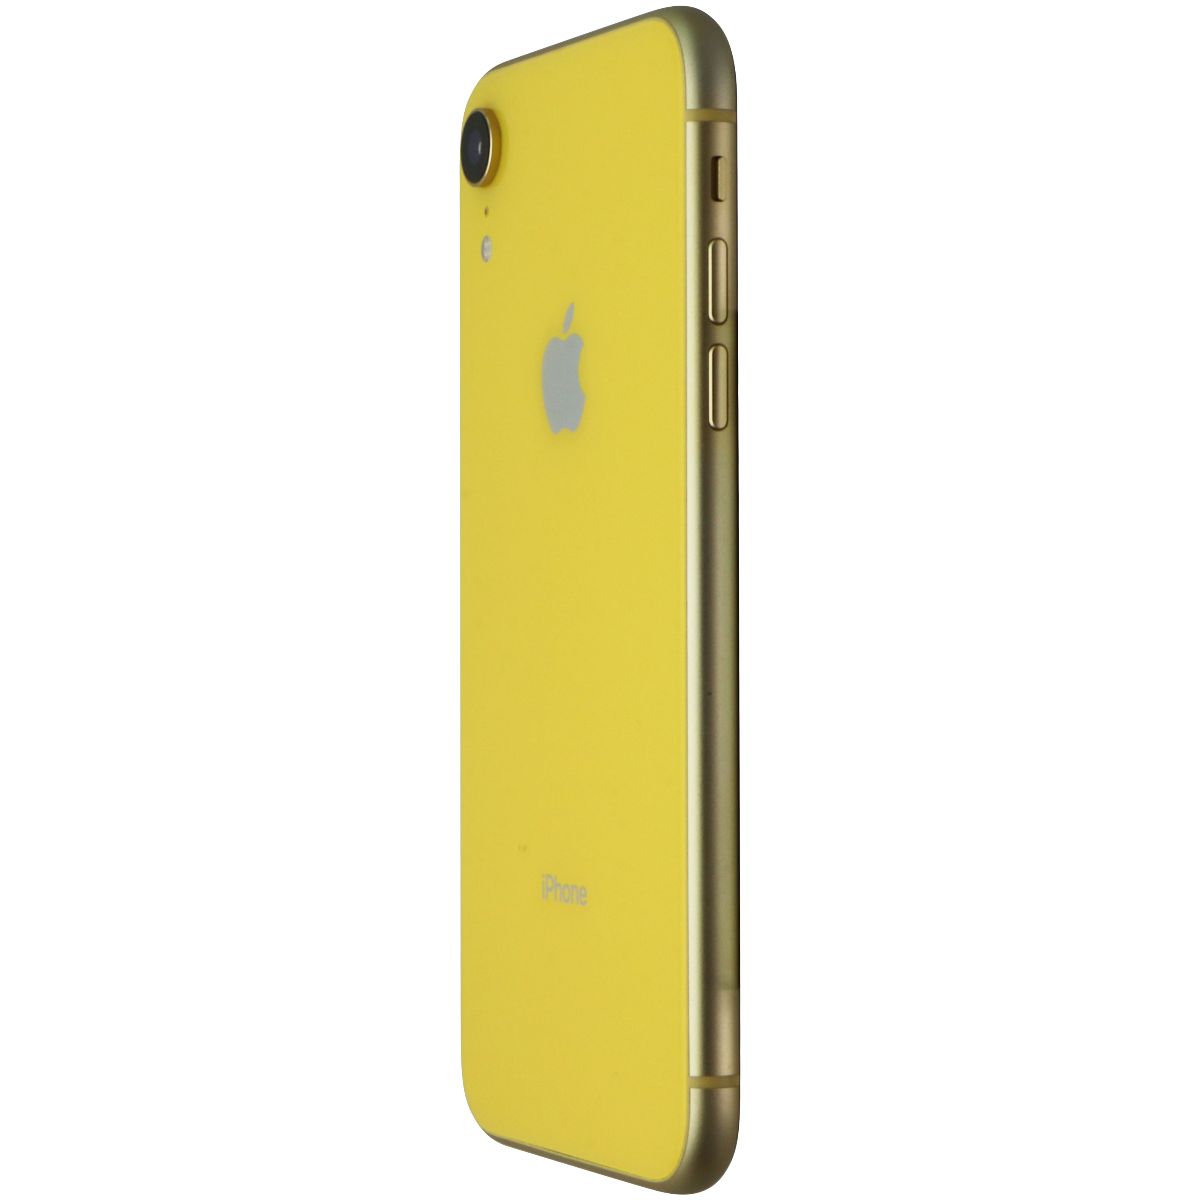 Apple iPhone XR (6.1-inch) Smartphone (A1984) Unlocked - 256GB / Yellow Cell Phones & Smartphones Apple    - Simple Cell Bulk Wholesale Pricing - USA Seller